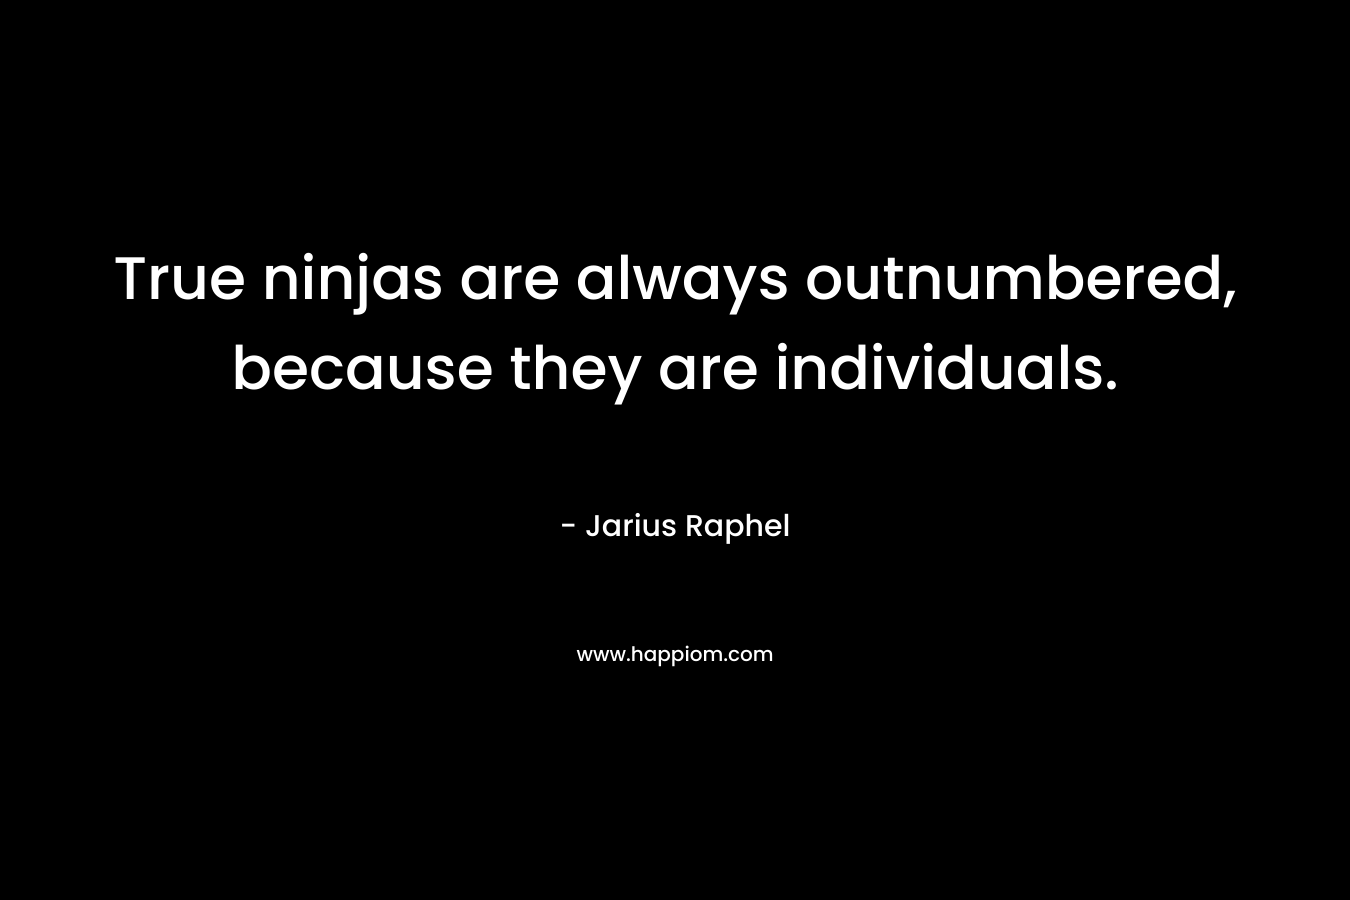 True ninjas are always outnumbered, because they are individuals.